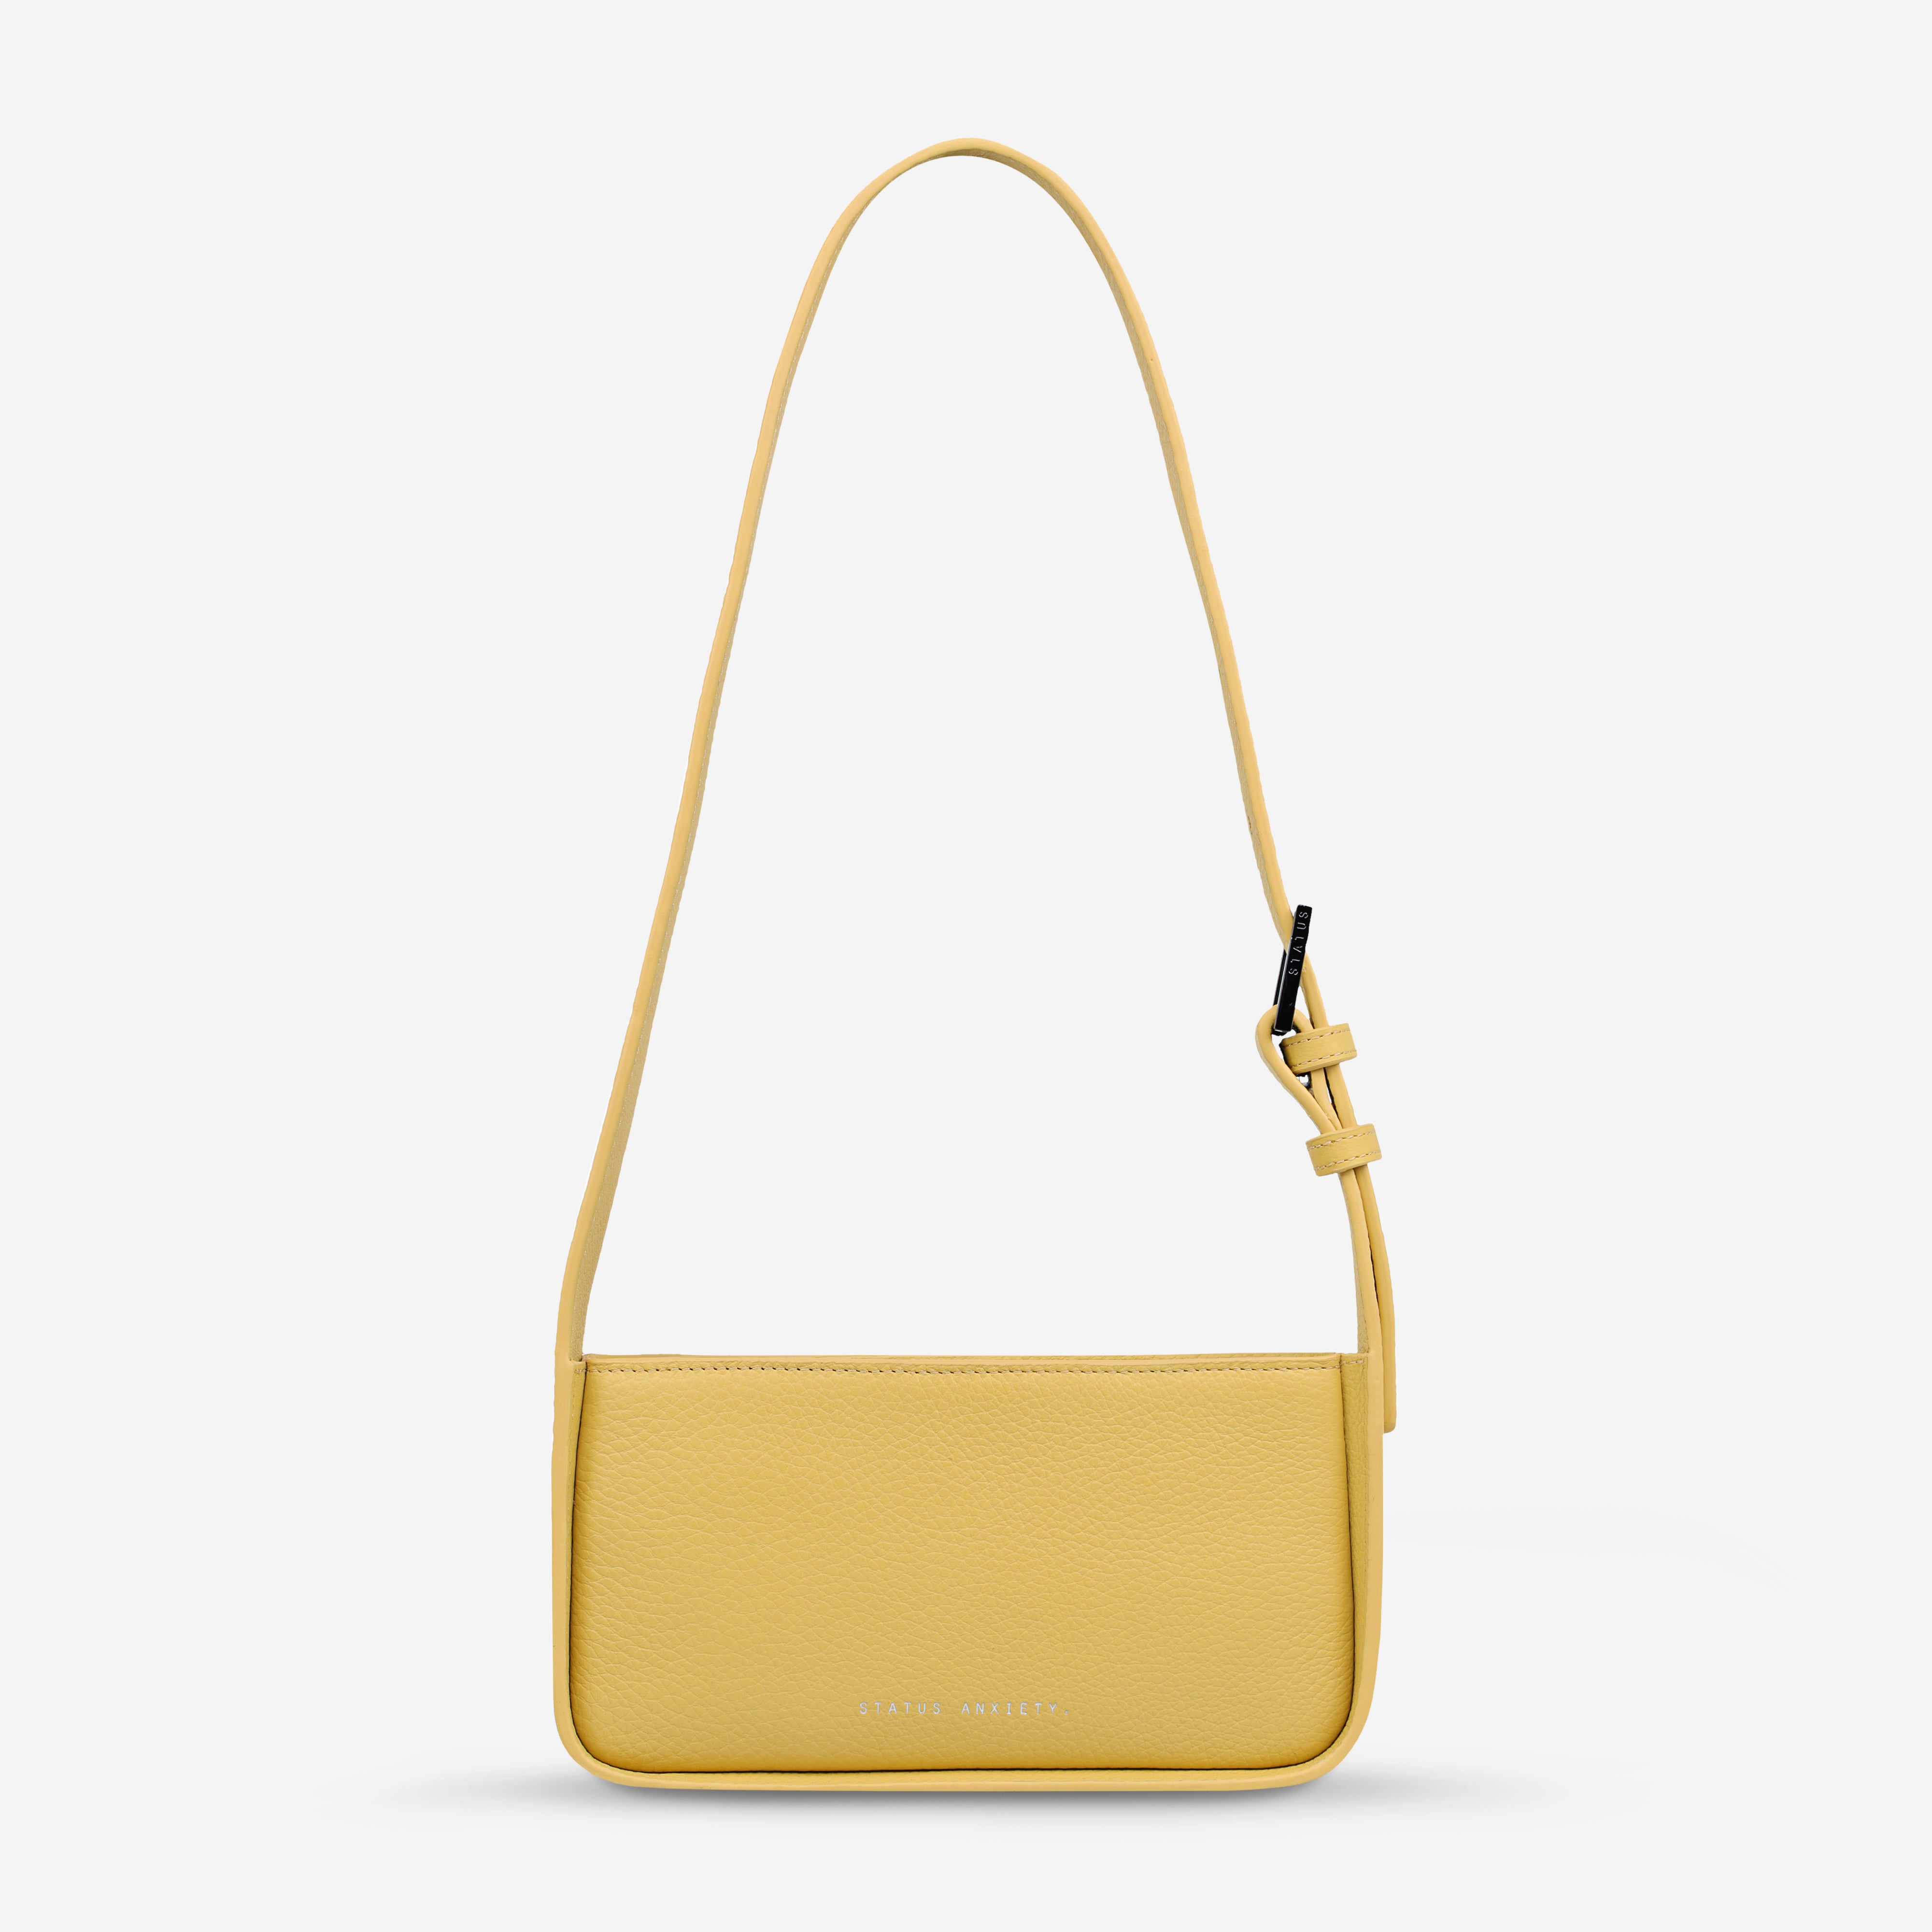 Status Anxiety State Of Mind Women's Leather Bag Buttermilk